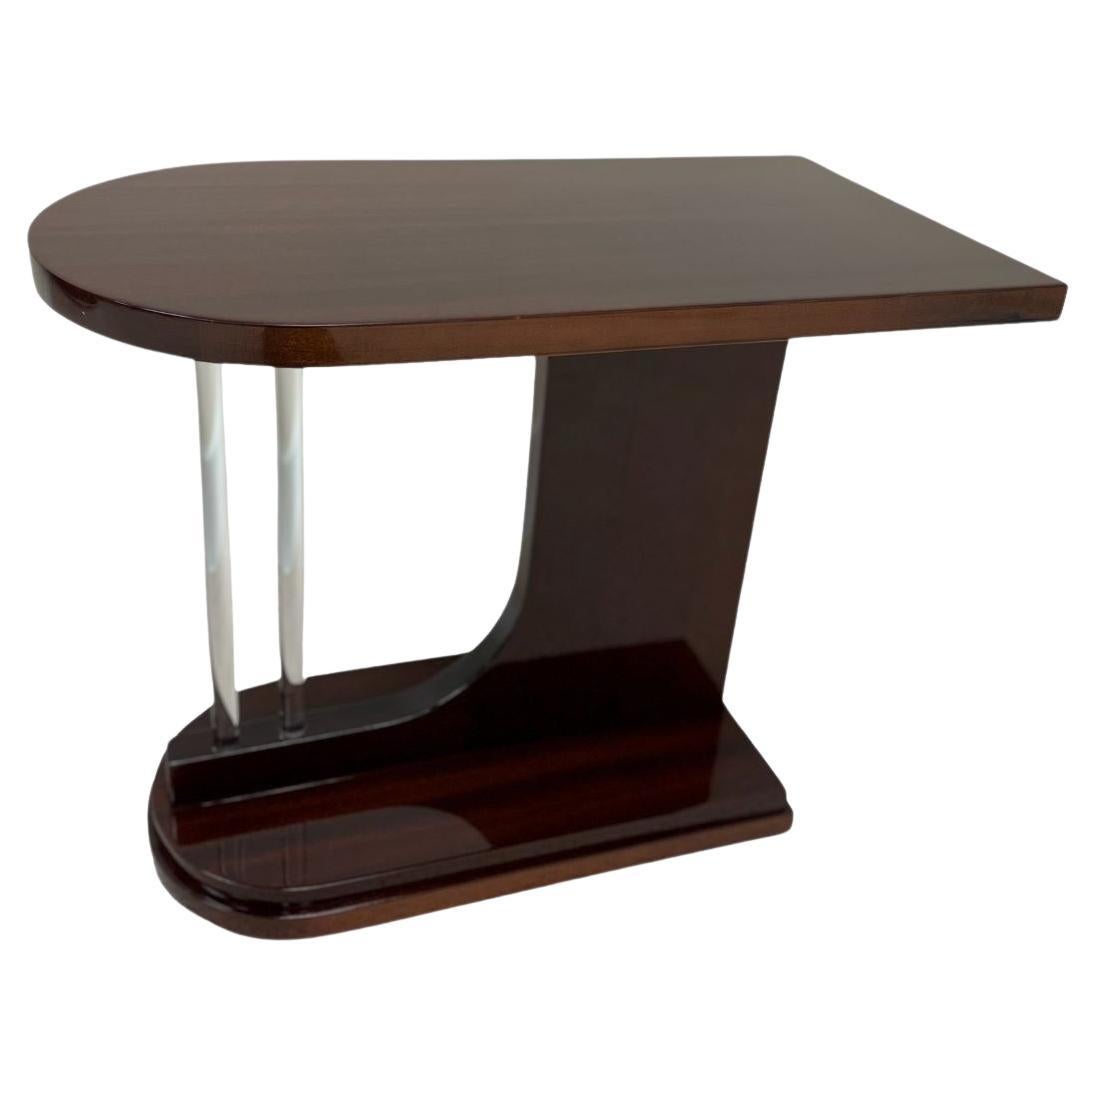 American Streamline Moderne  Art Deco Bullet Side Table With Glass Rods C.1930 For Sale